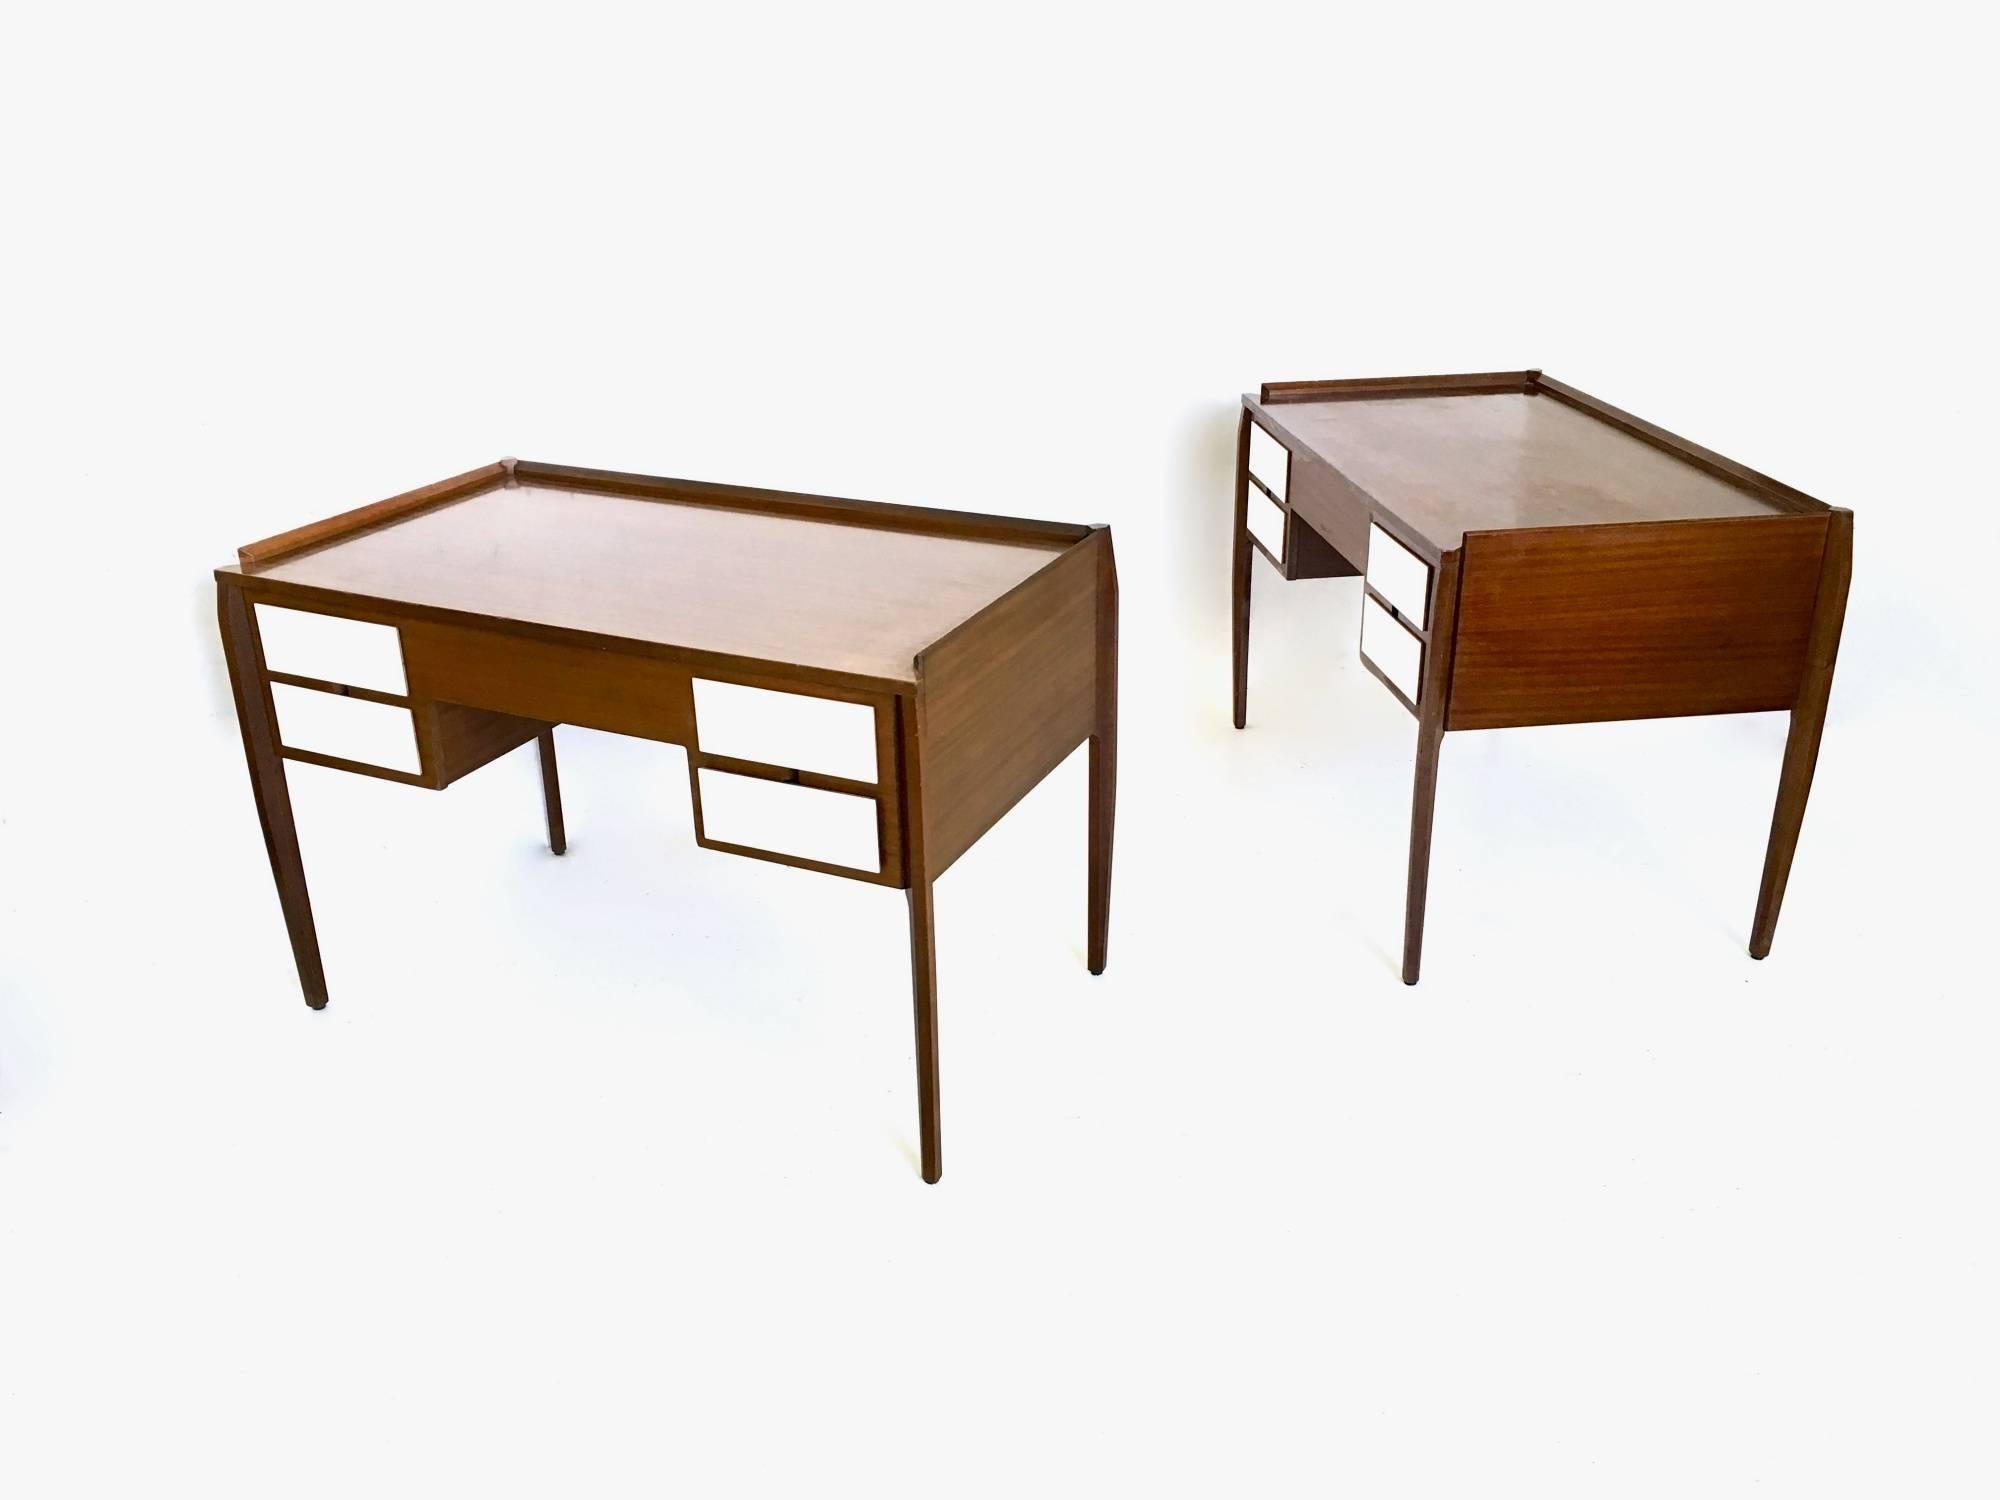 Made in Italy, 1950s - 1960s.
They feature an ebonized beech frame and four Formica veneered drawers each.
These desks both have the same timber but with two slightly different shades.
They may show imperceptible traces of use, but are in very good